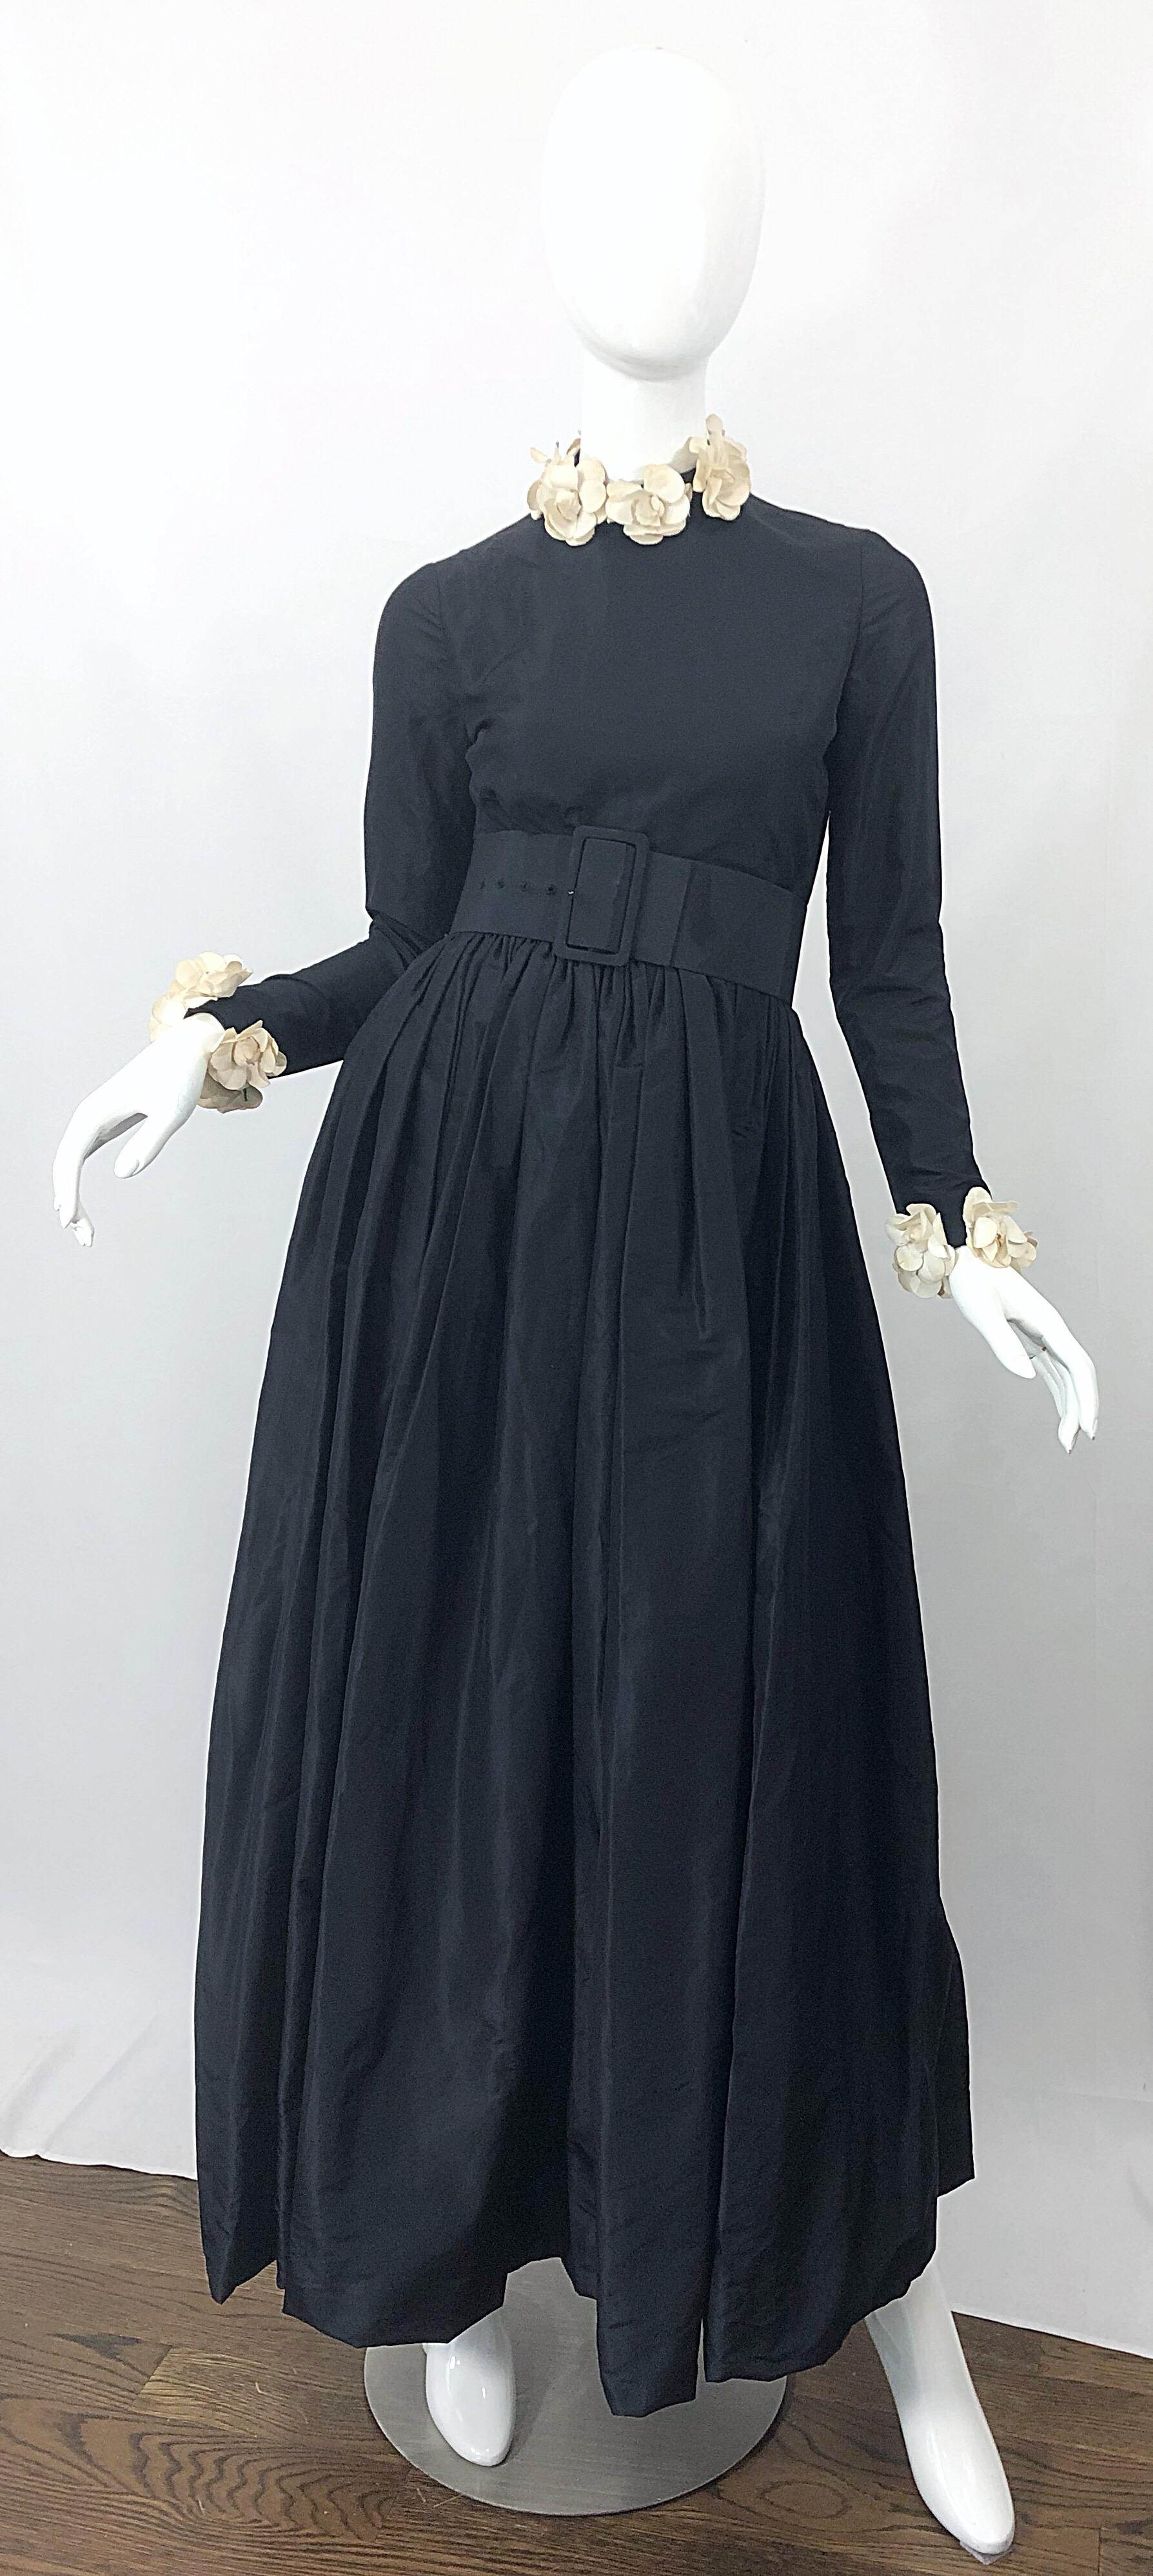 Sensational early 1970s BILL BLASS black and ivory camellia flower open back long sleeve silk taffeta 70s gown! Features a fitted high neck bodice with an open back. Neck and sleeves are adorned with removable ivory camellia flowers. Extra wide